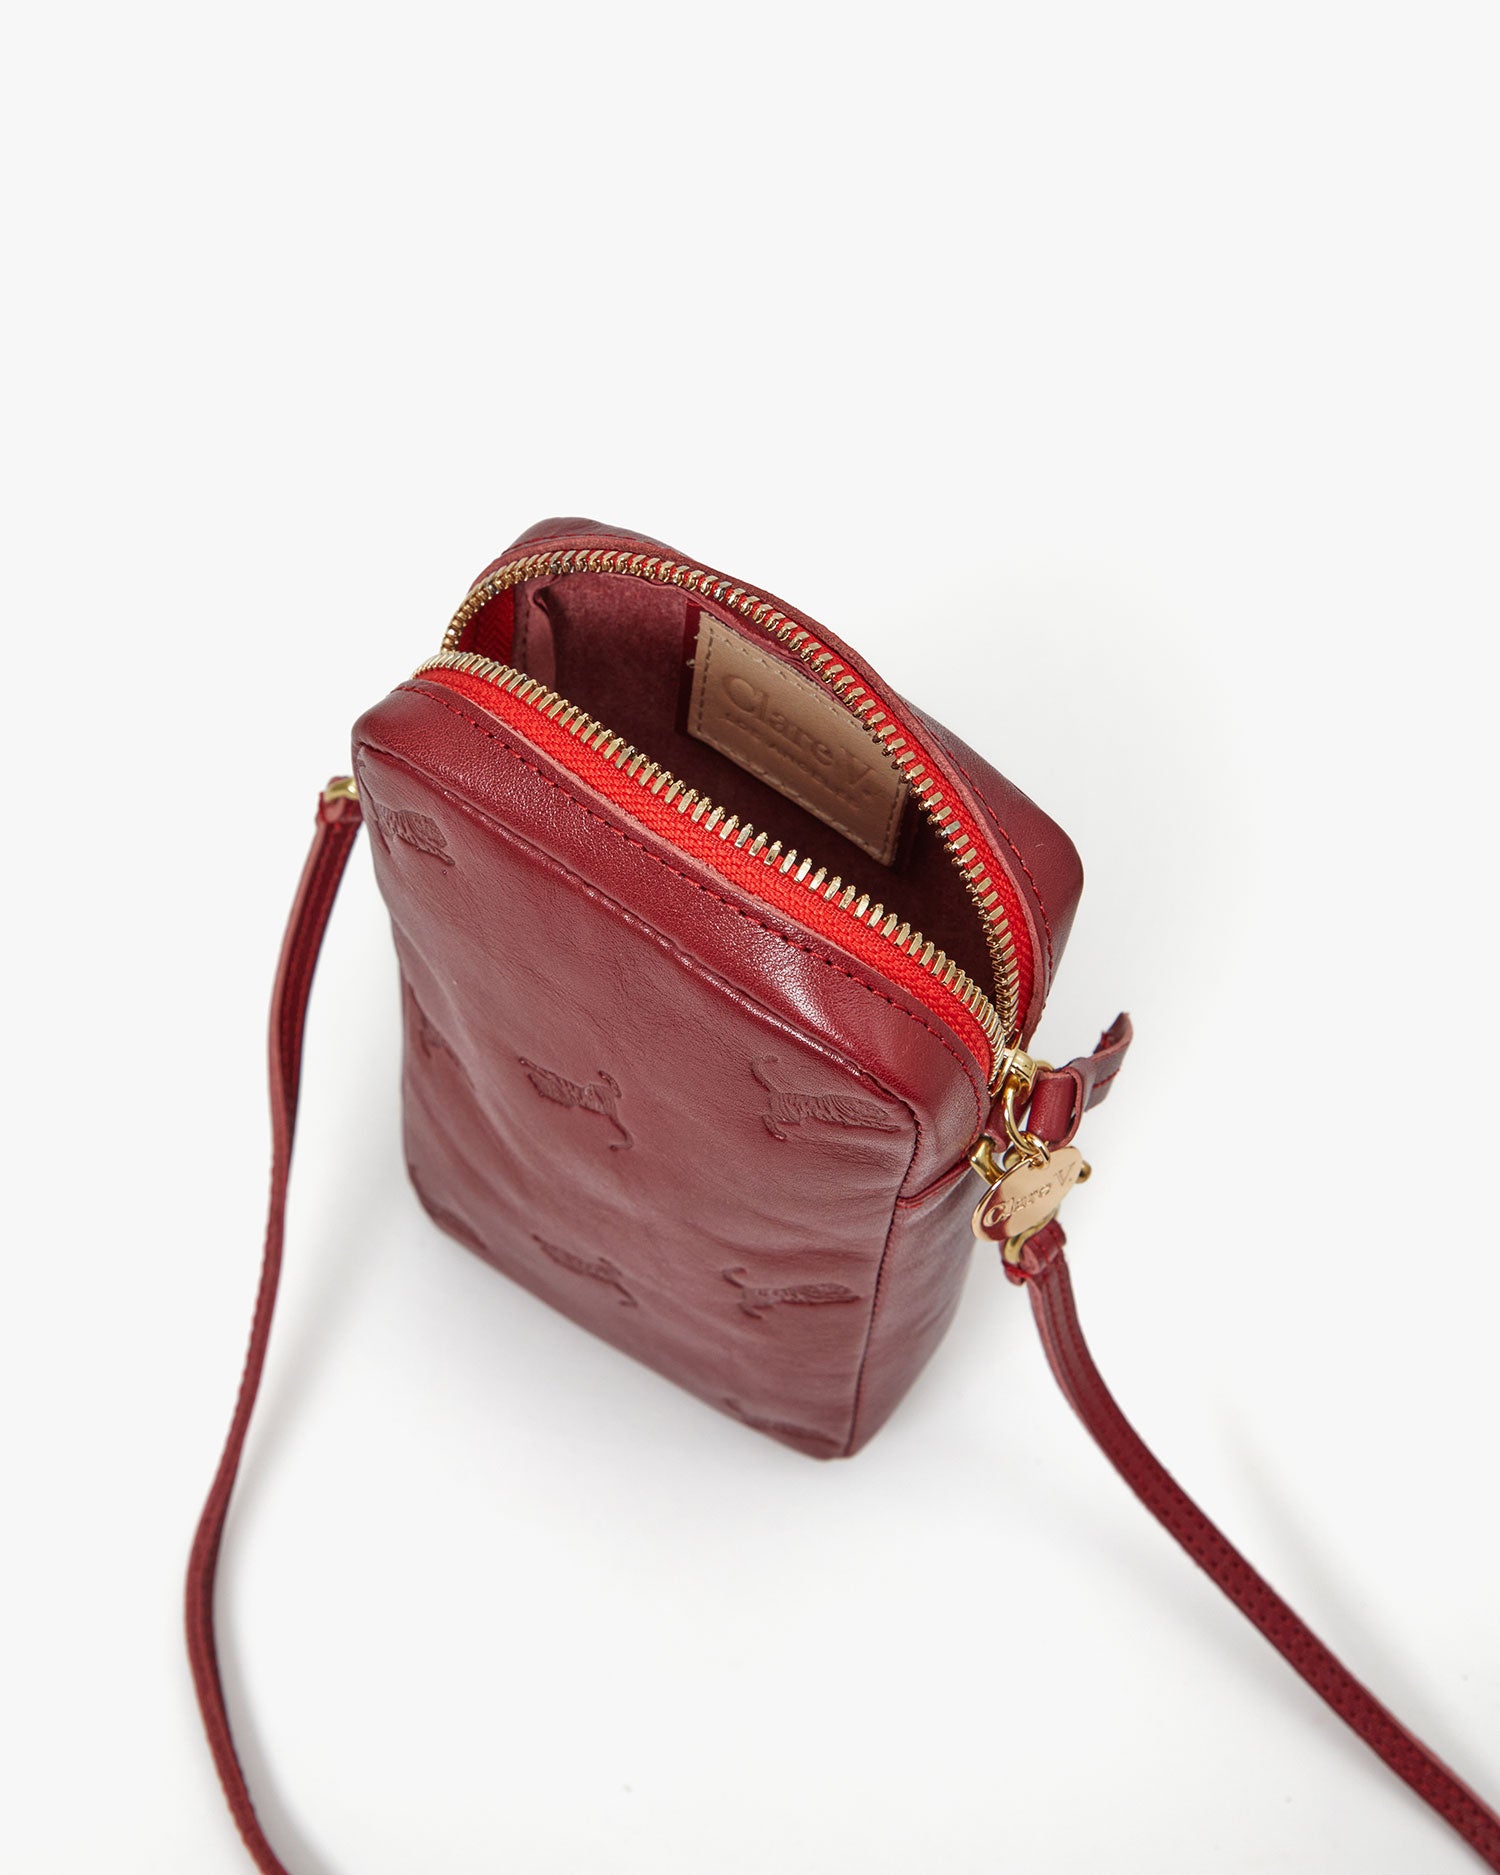 Oxblood Rustic Le Zip Sac Tote by Clare V. for $20